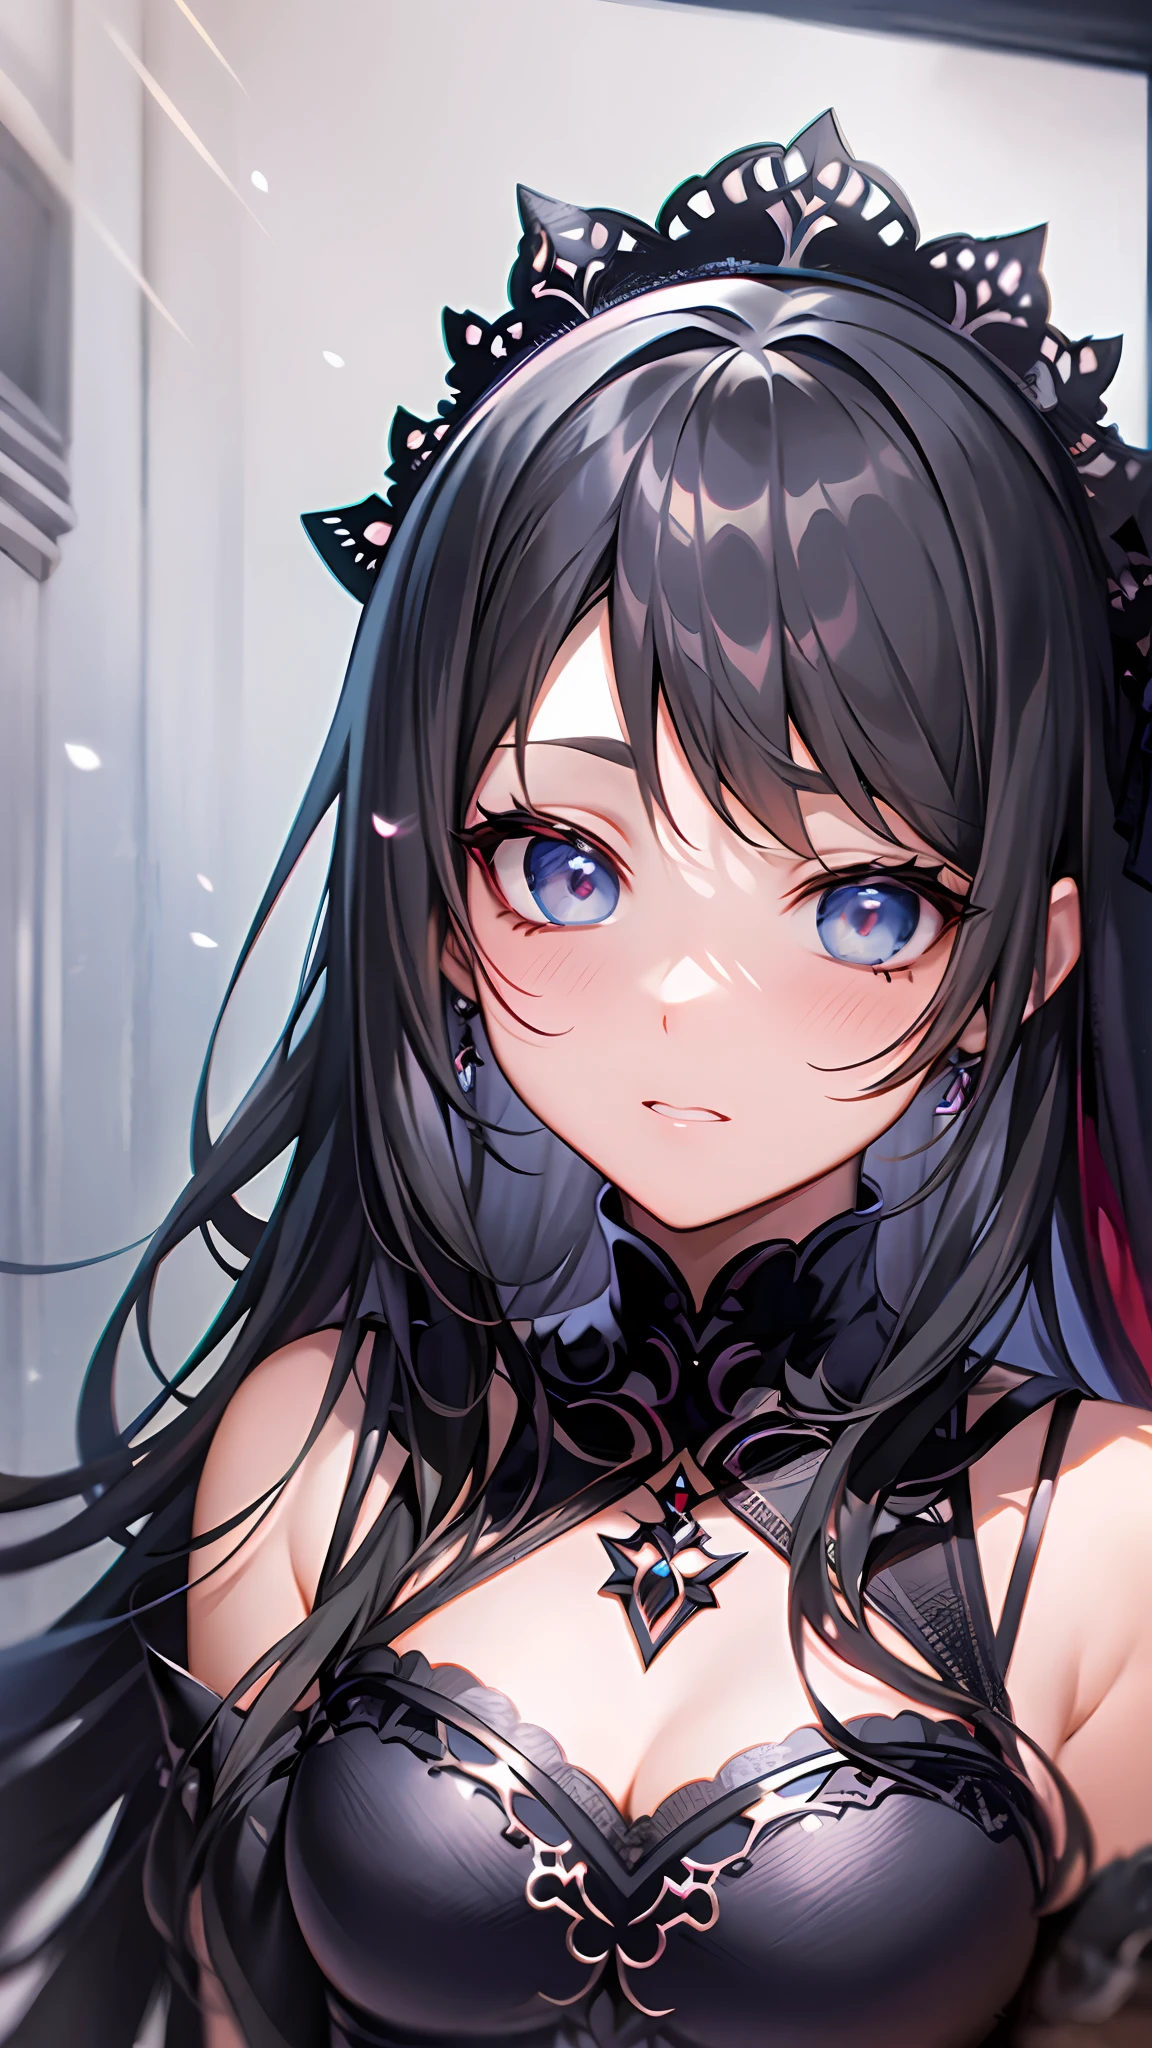 Close up portrait of woman in dress in white and black dress、Gothic Otome anime girl、anime girl wearing a black dress、Cute anime waifu in a nice dress、Anime girl in maid costume、Elegant Gothic princess、guweiz、Gwaits at Pixiv Art Station、Gwaitz at Art Station pixiv、Beautiful anime girl、Embarrassed look